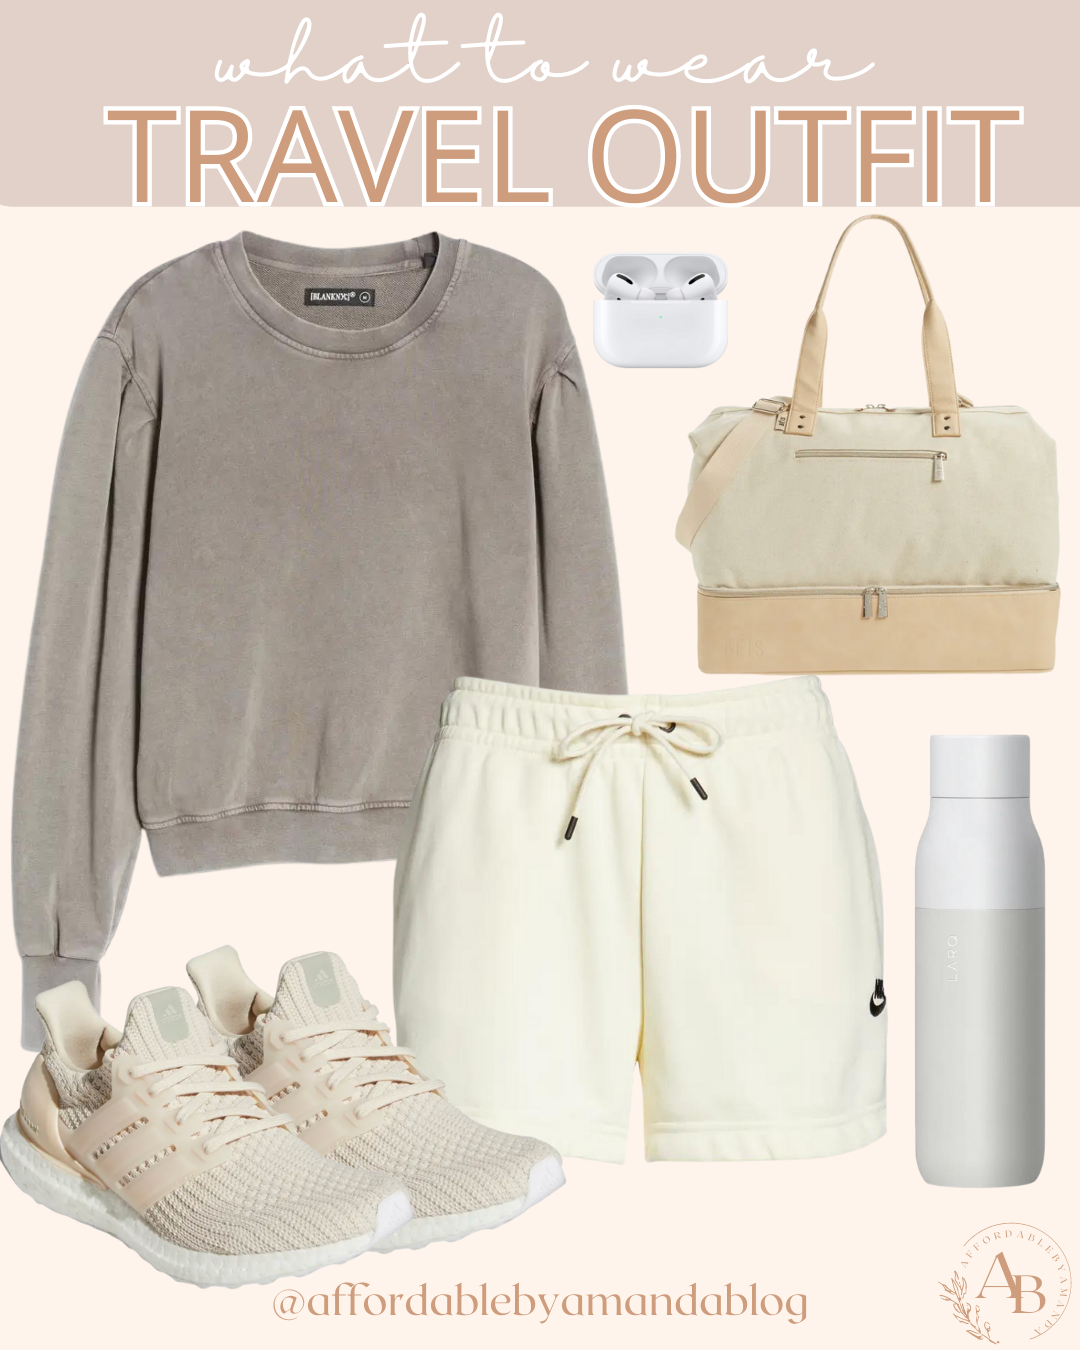 BLANKNYC French Terry Sweatshirt | NIKE Essential Shorts | Travel Outfit Idea 2021